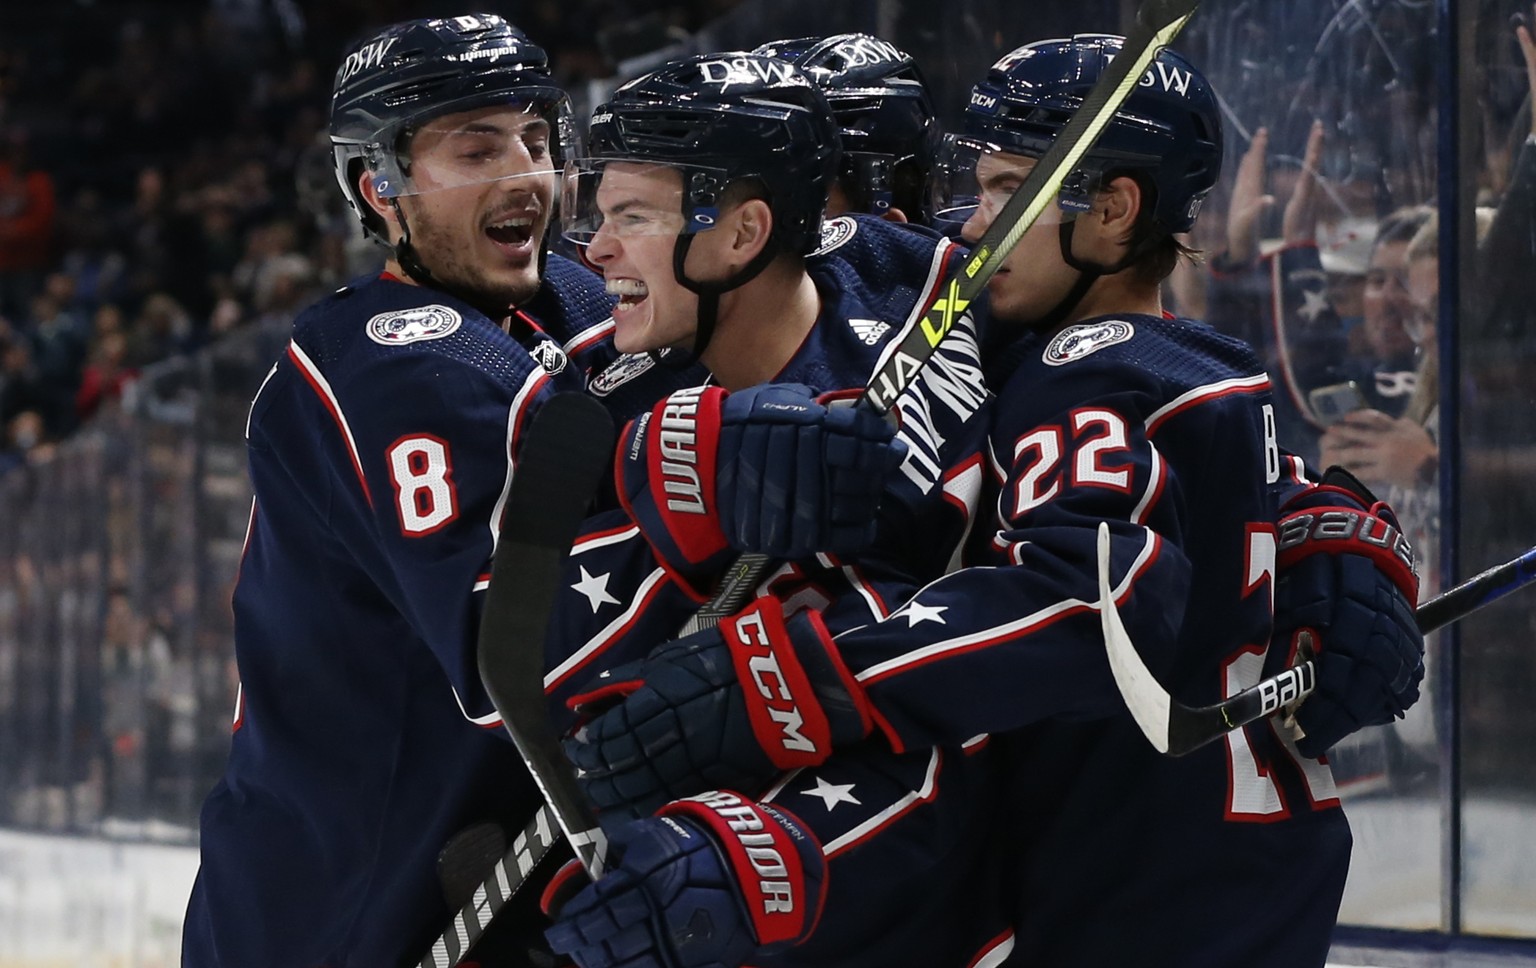 Columbus Blue Jackets' Gregory Hofmann, center, celebrates his goal against the Dallas Stars during the second period of an NHL hockey game Monday, Oct. 25, 2021, in Columbus, Ohio. (AP Photo/Jay LaPr ...